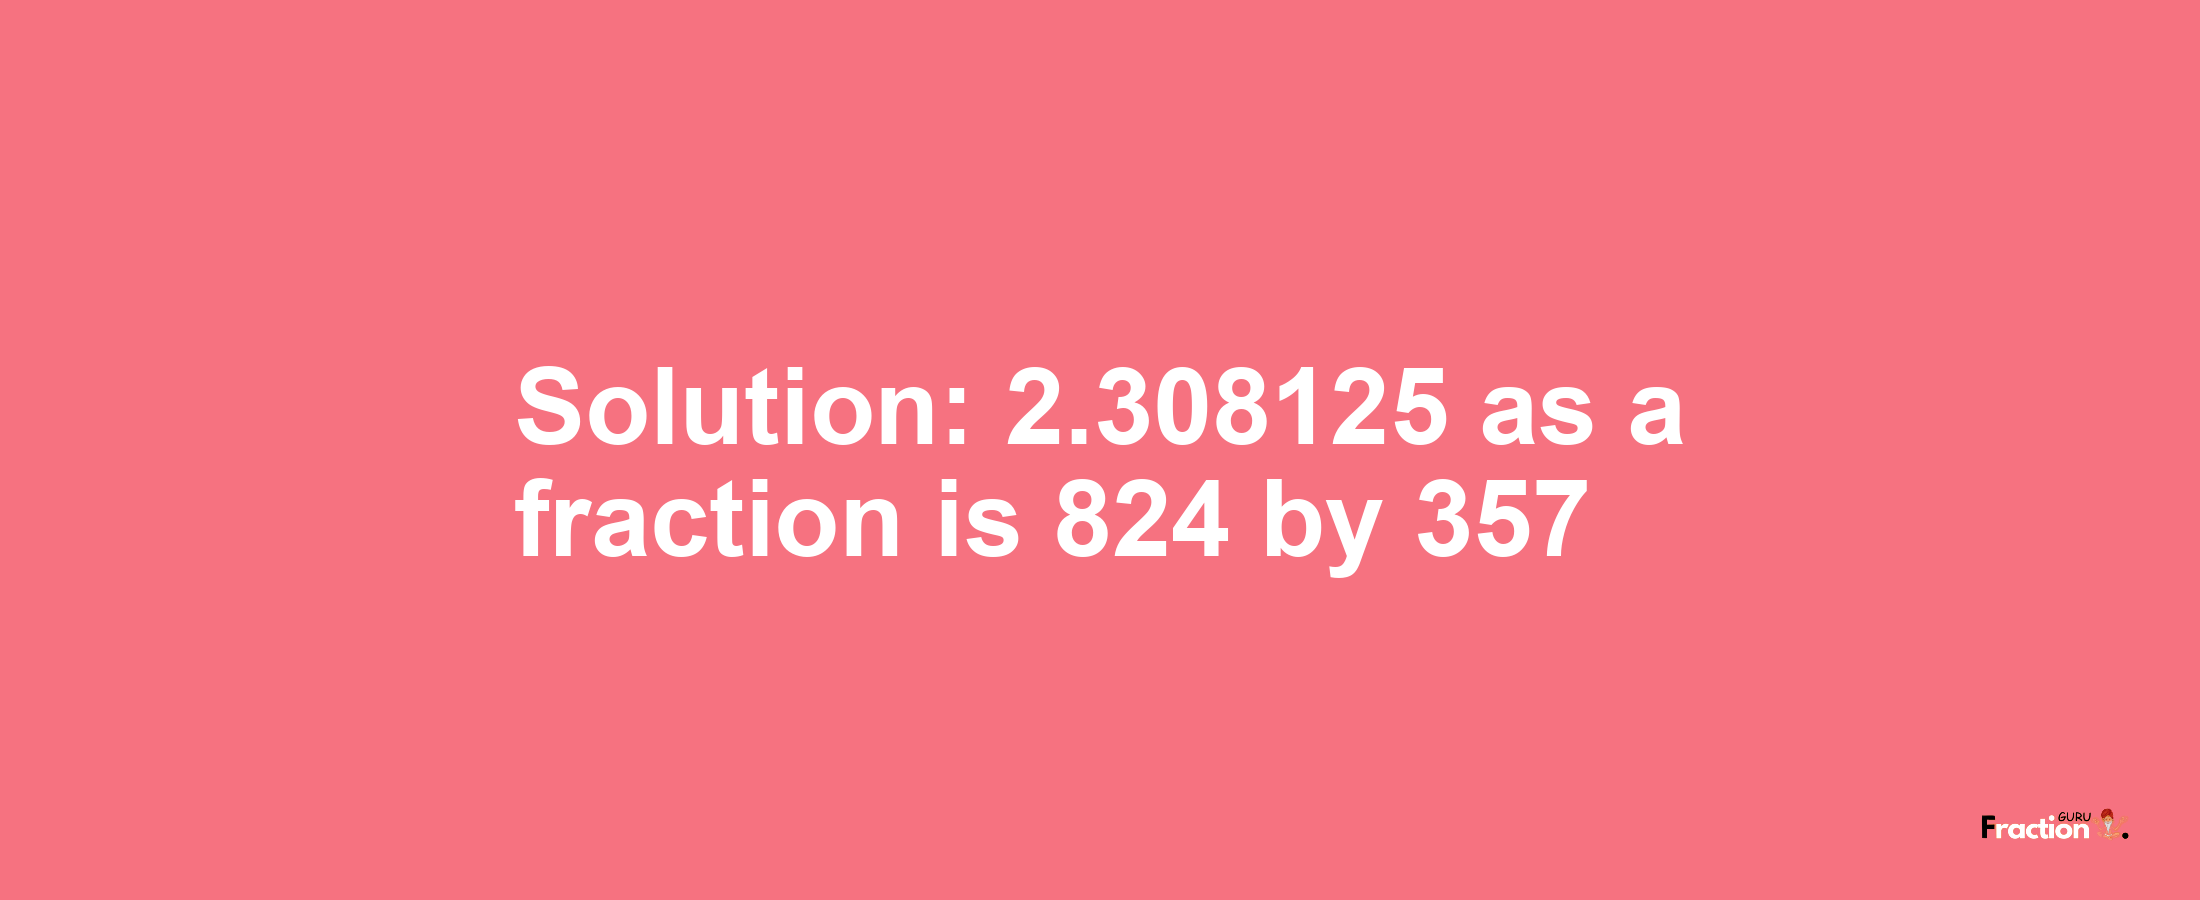 Solution:2.308125 as a fraction is 824/357